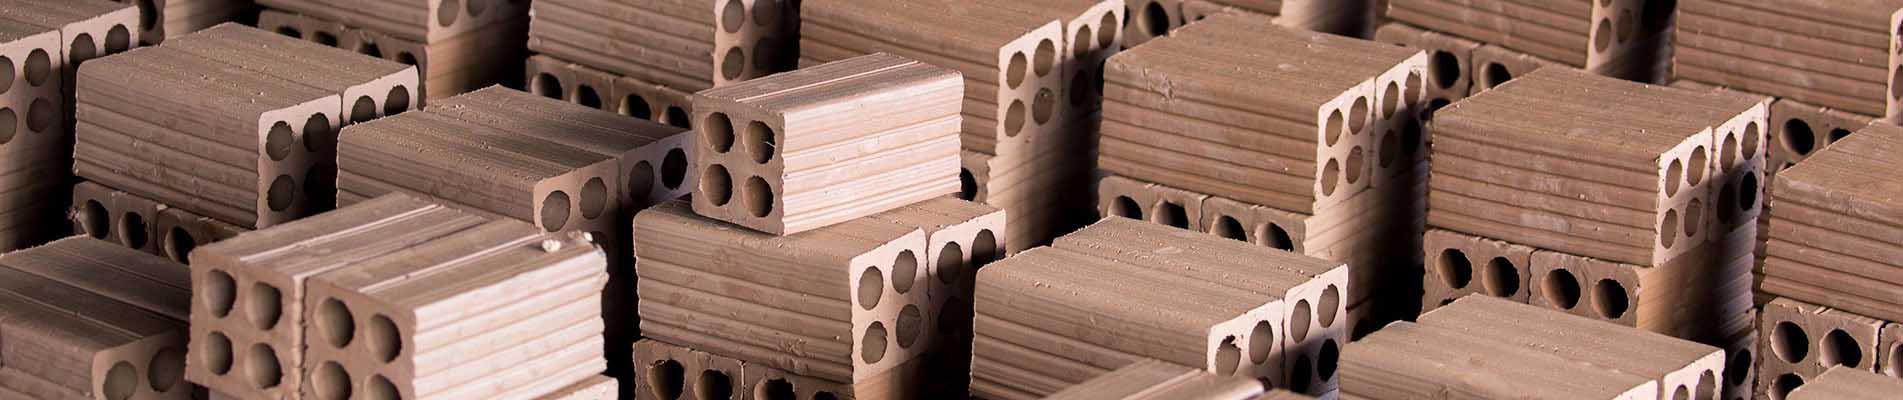 Coatings to minimize wear in ceramic tile manufacturing